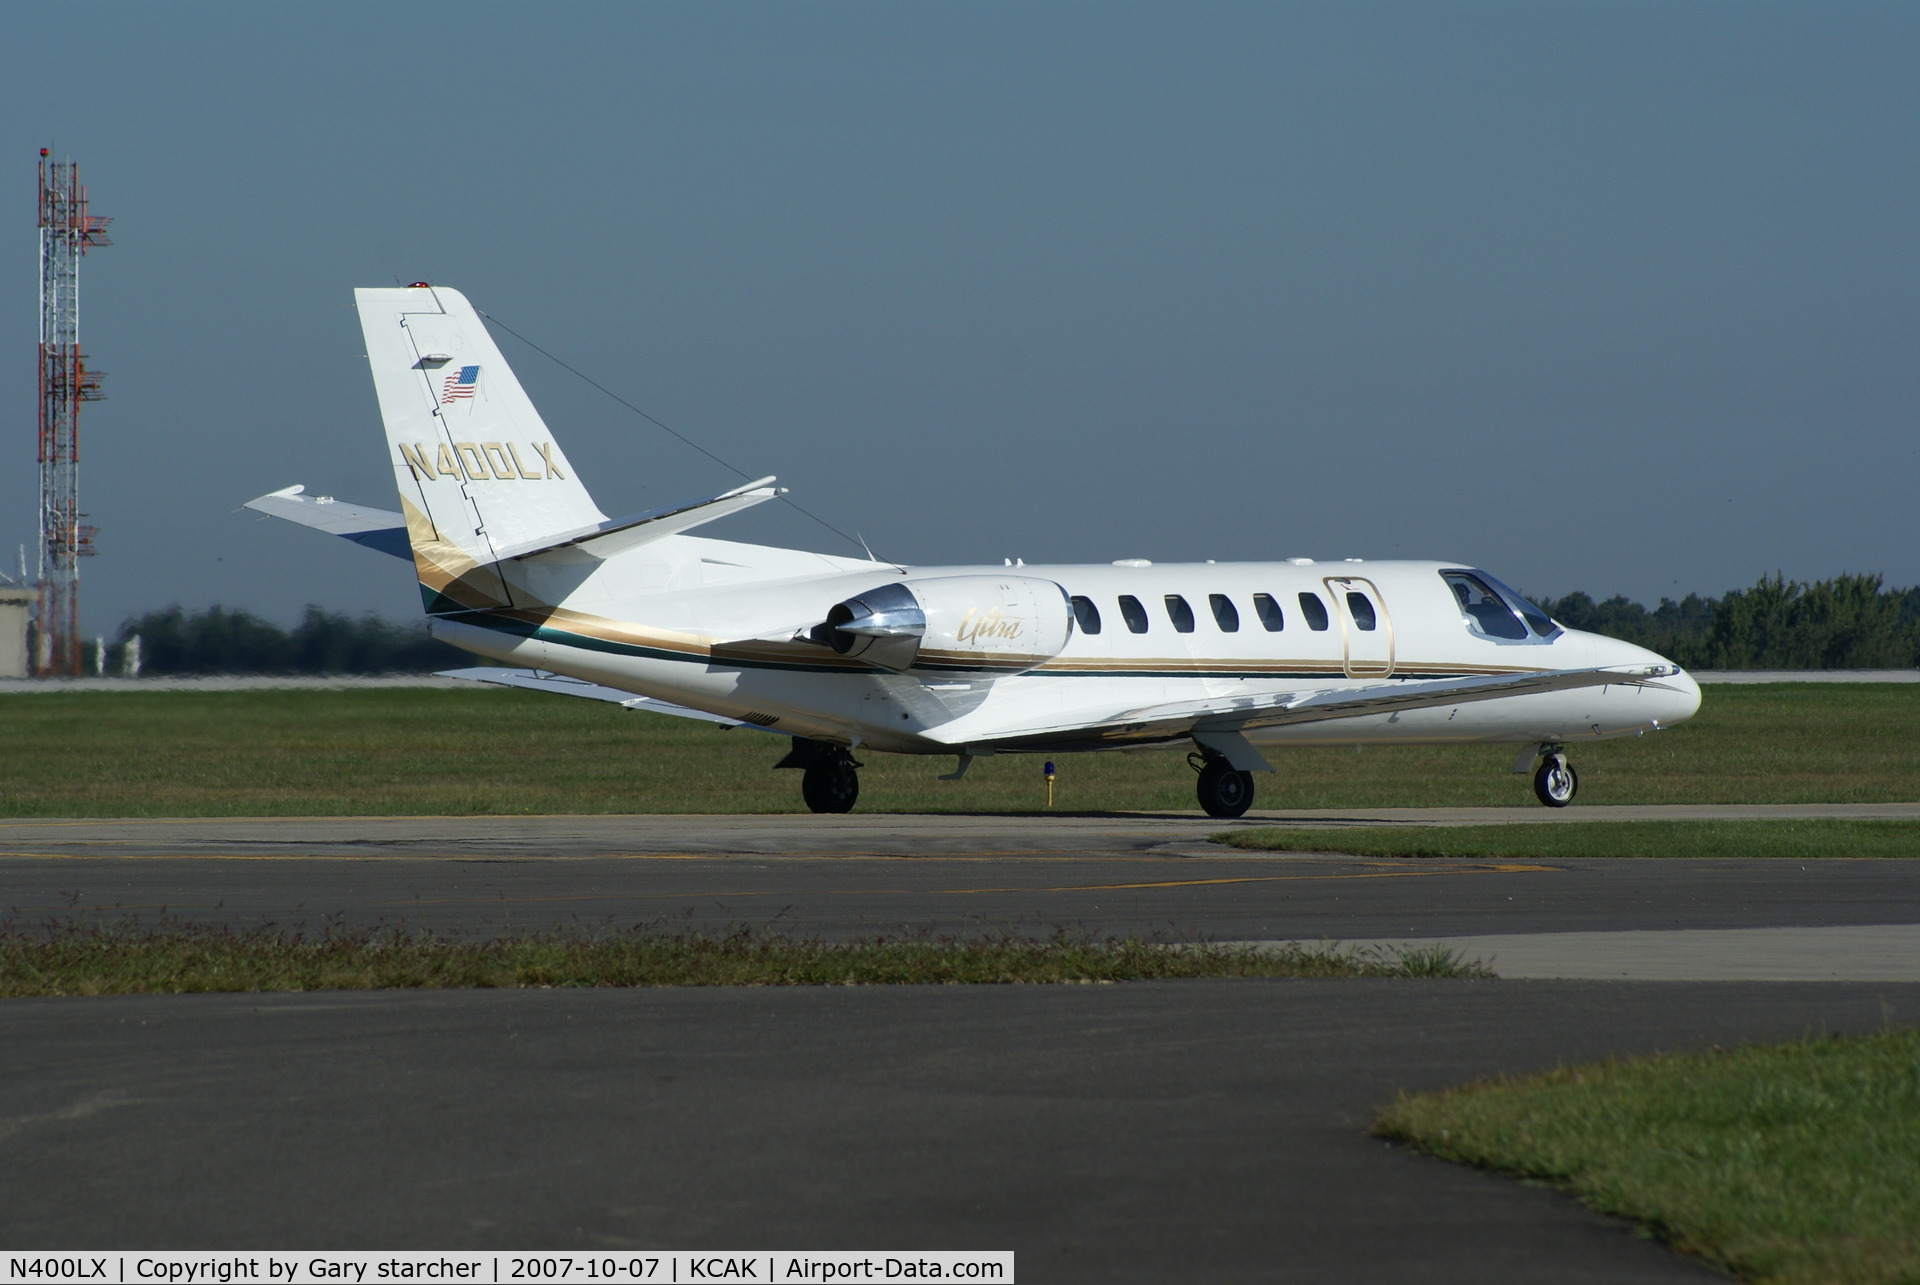 N400LX, 1998 Cessna 560 Citation Ultra C/N 560-0453, going to pick up someone